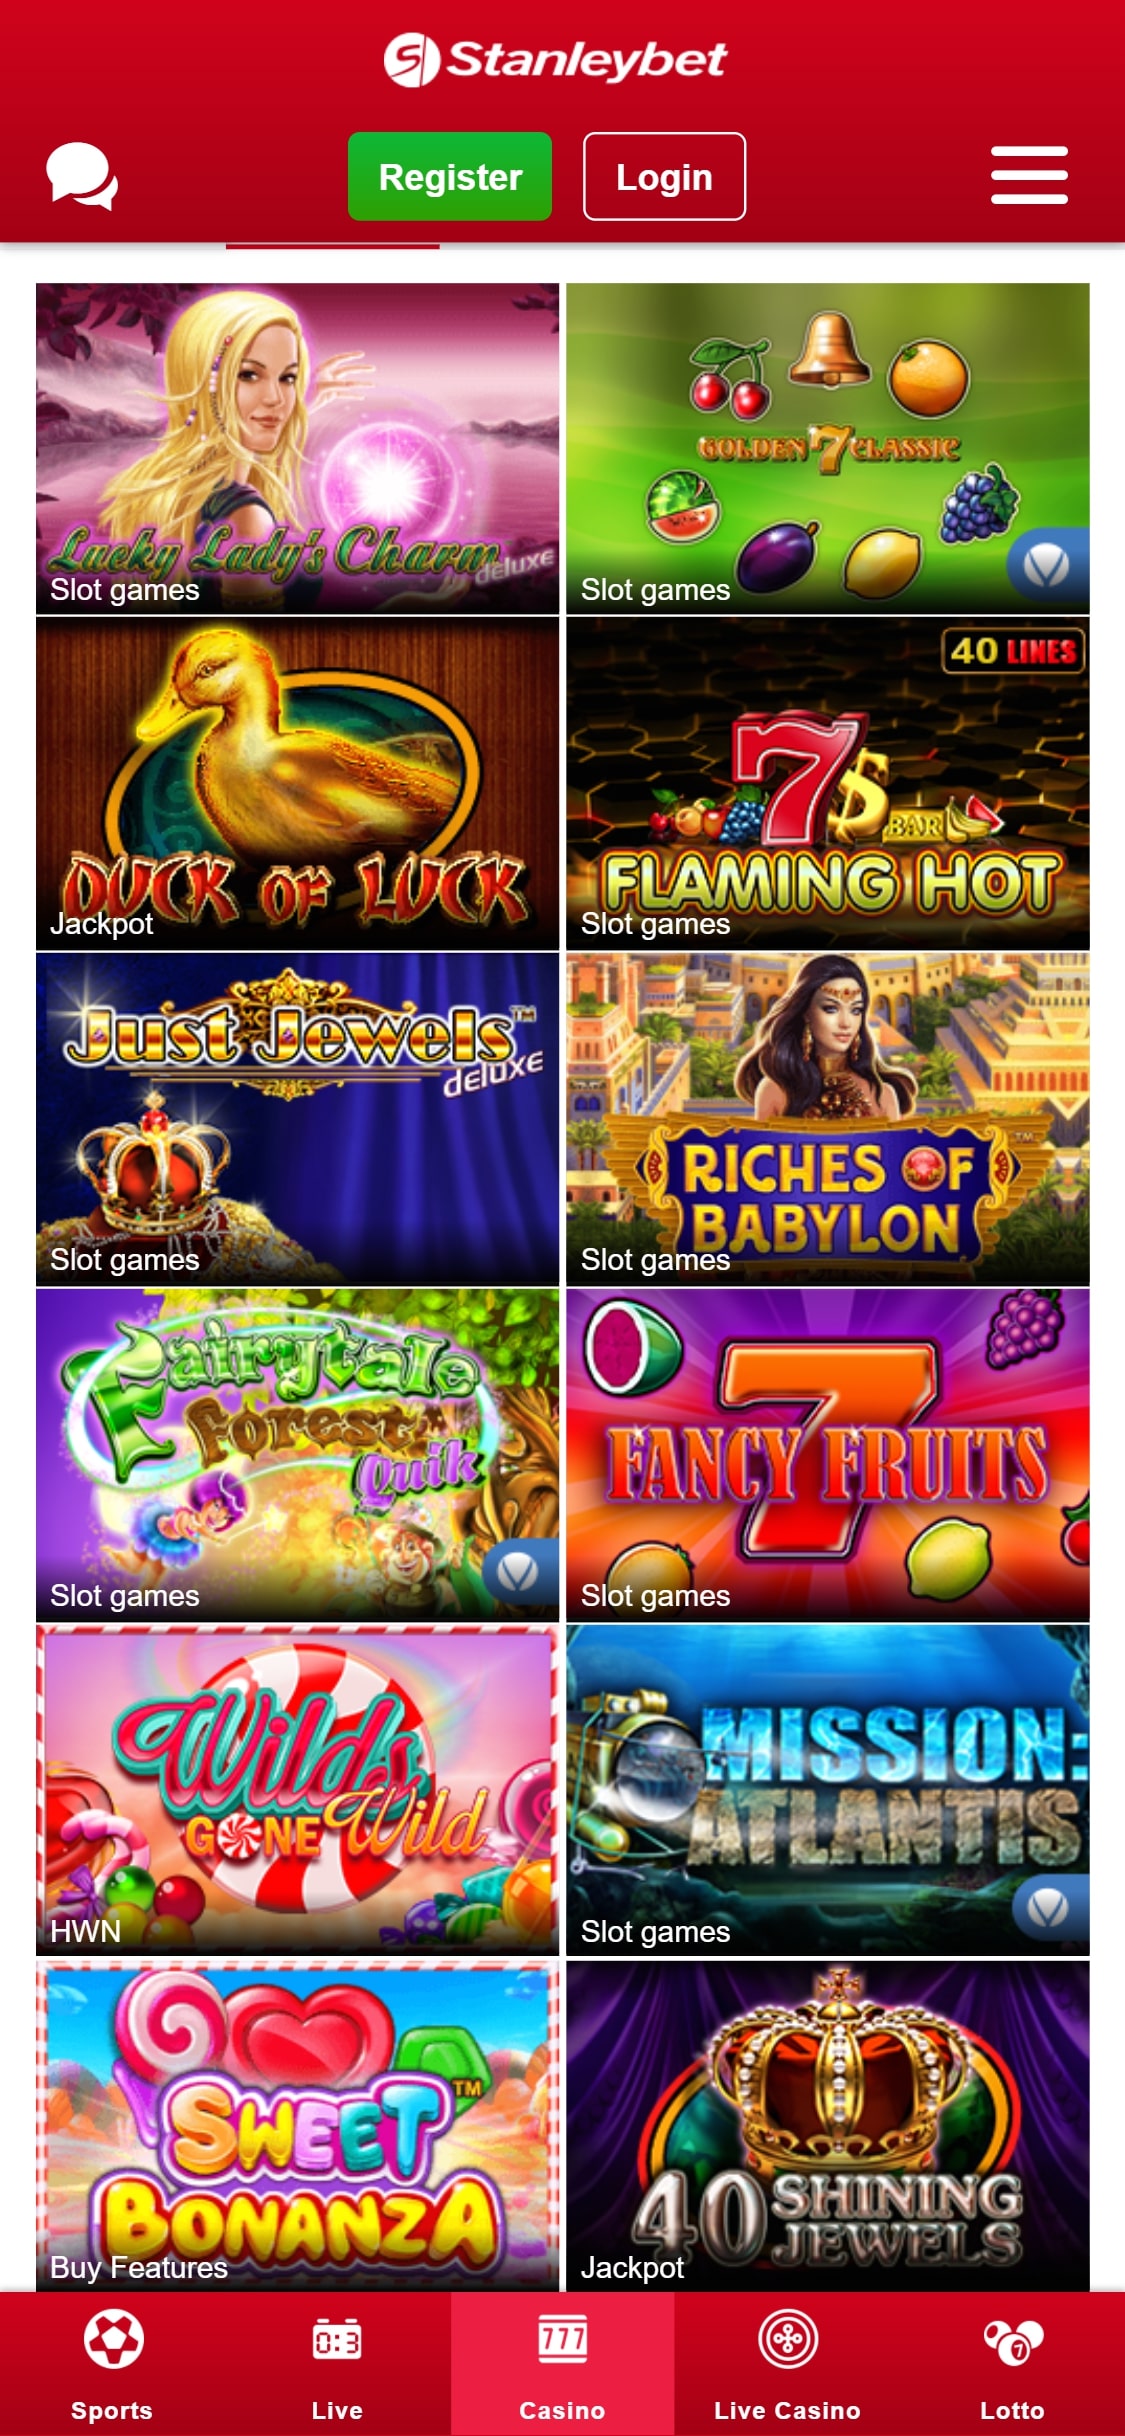 Stanleybet Mobile Games Review